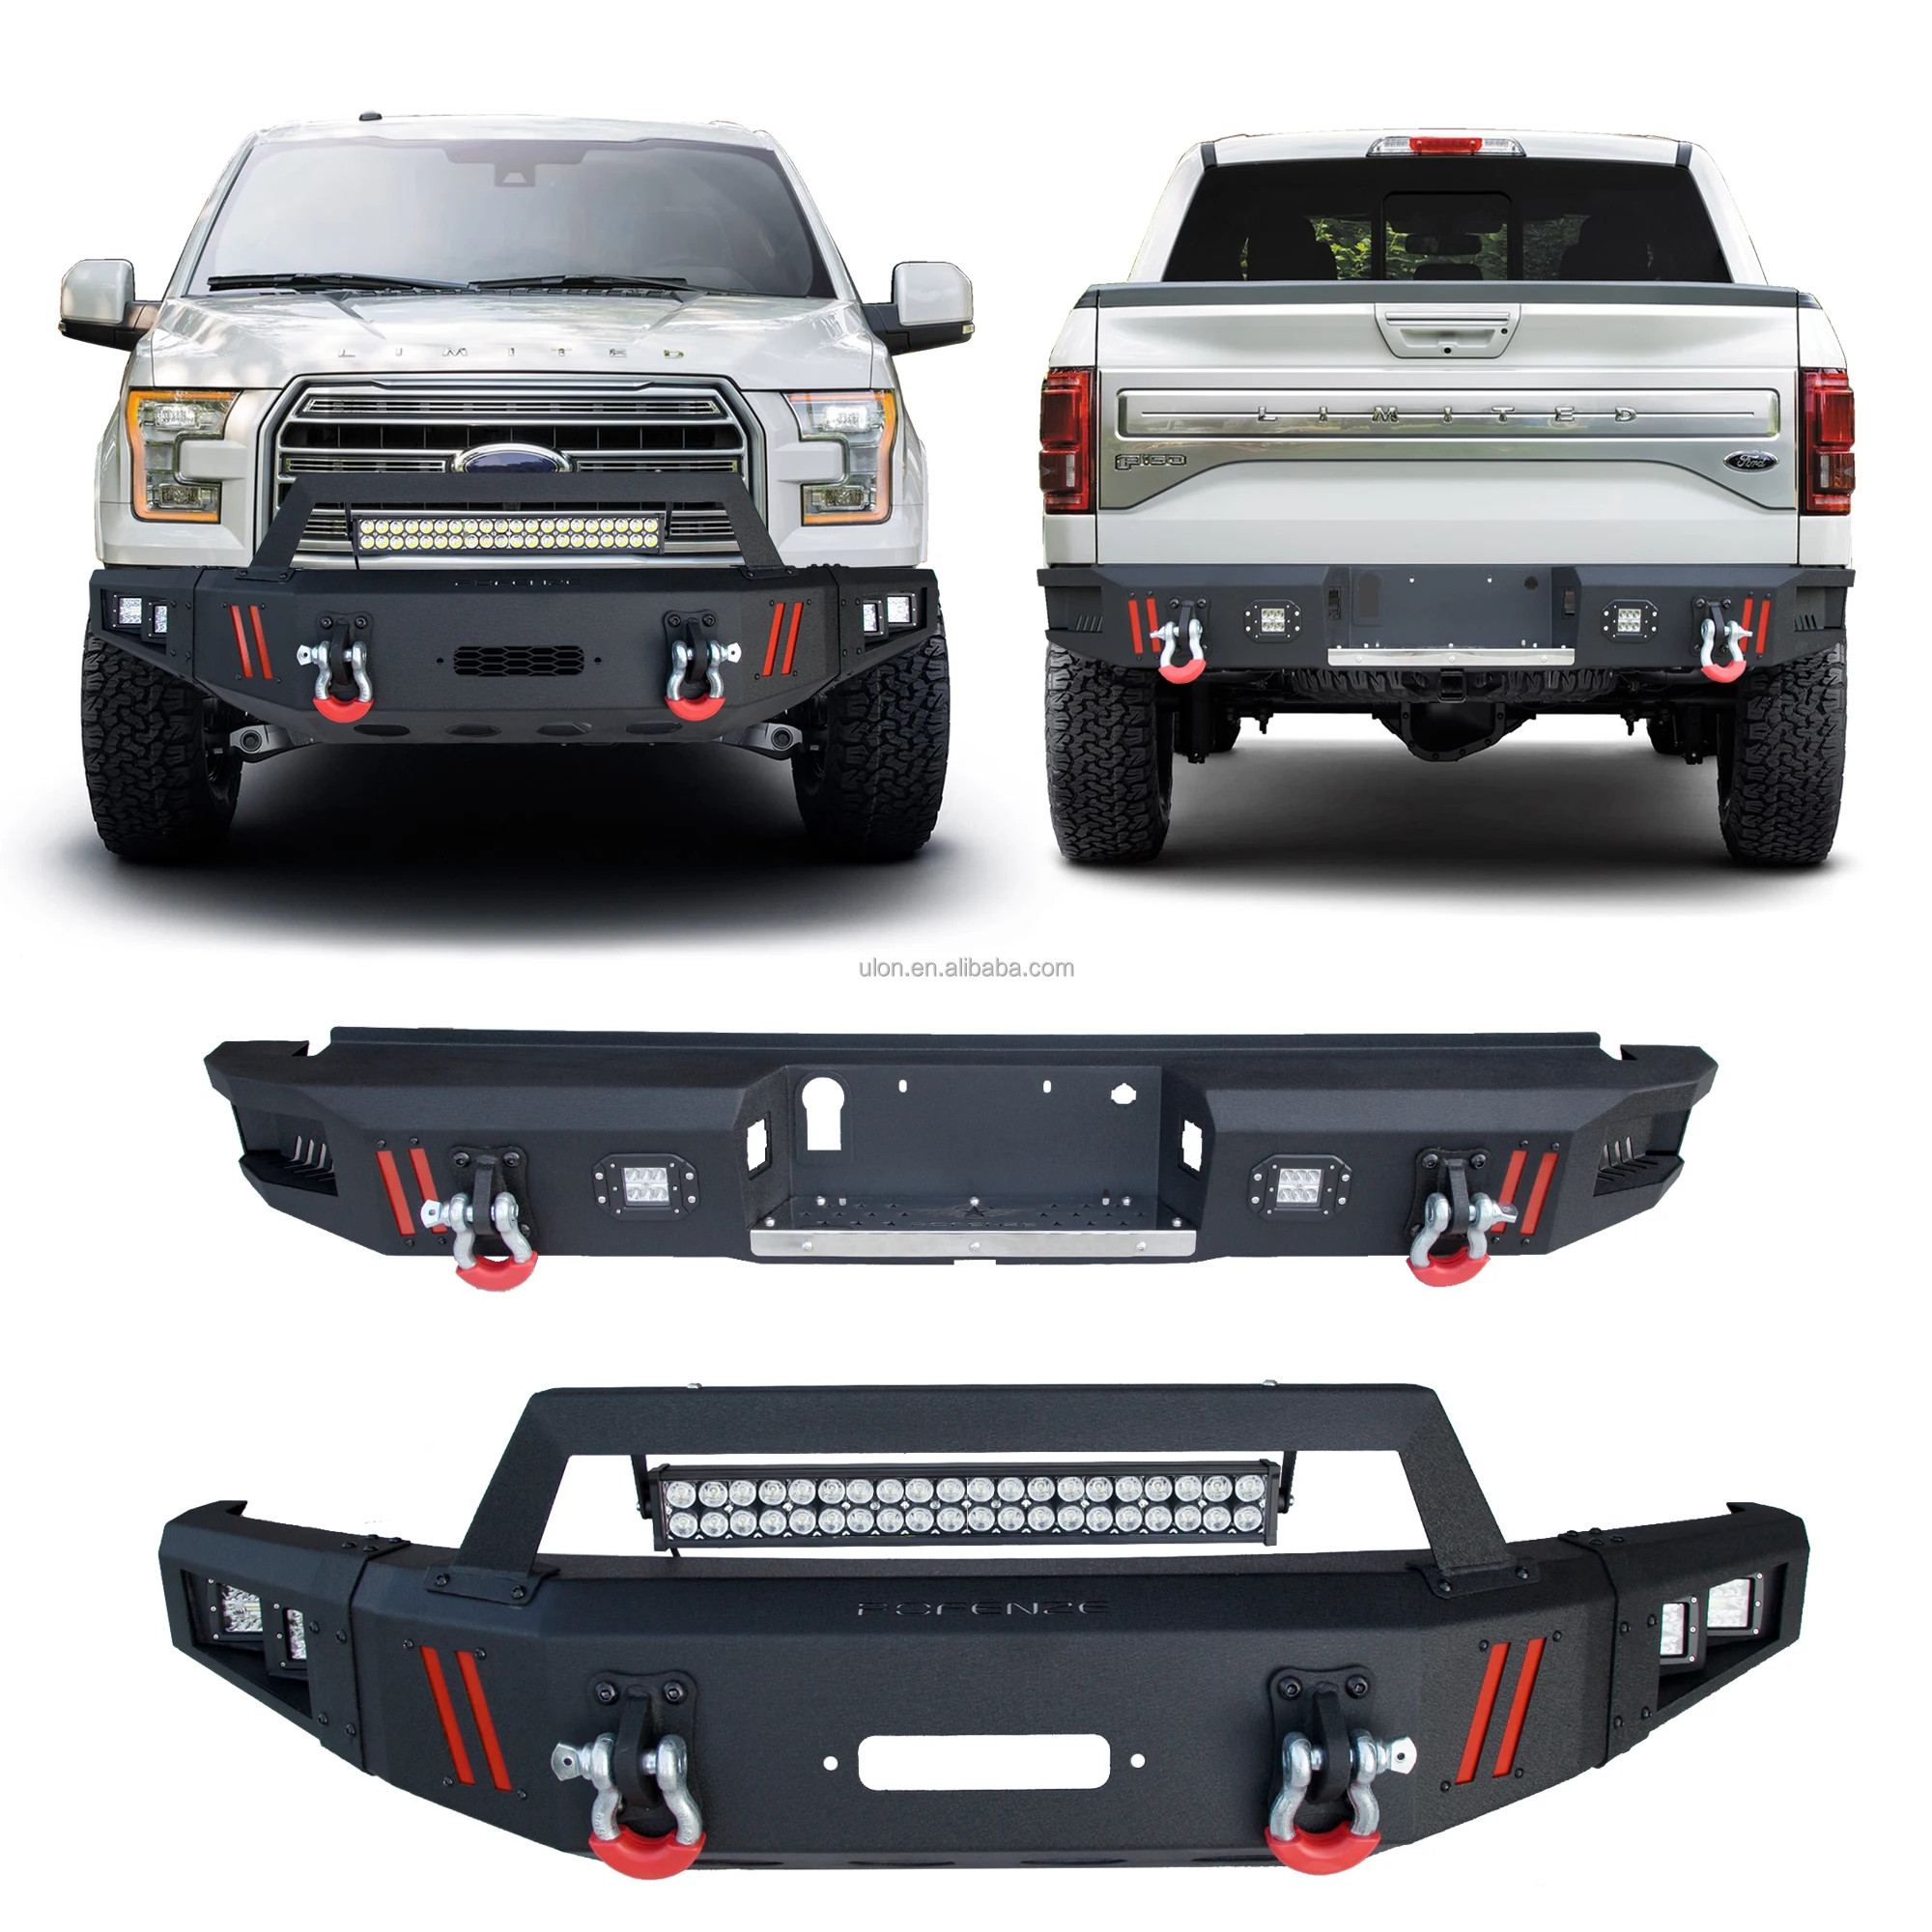 Hot Sell F 150 Truck Bumper Full Width Front Bumper and Rear Bumper Combo fit 2015 2017 Ford F150 (Excluding Raptor) (1600620148728)